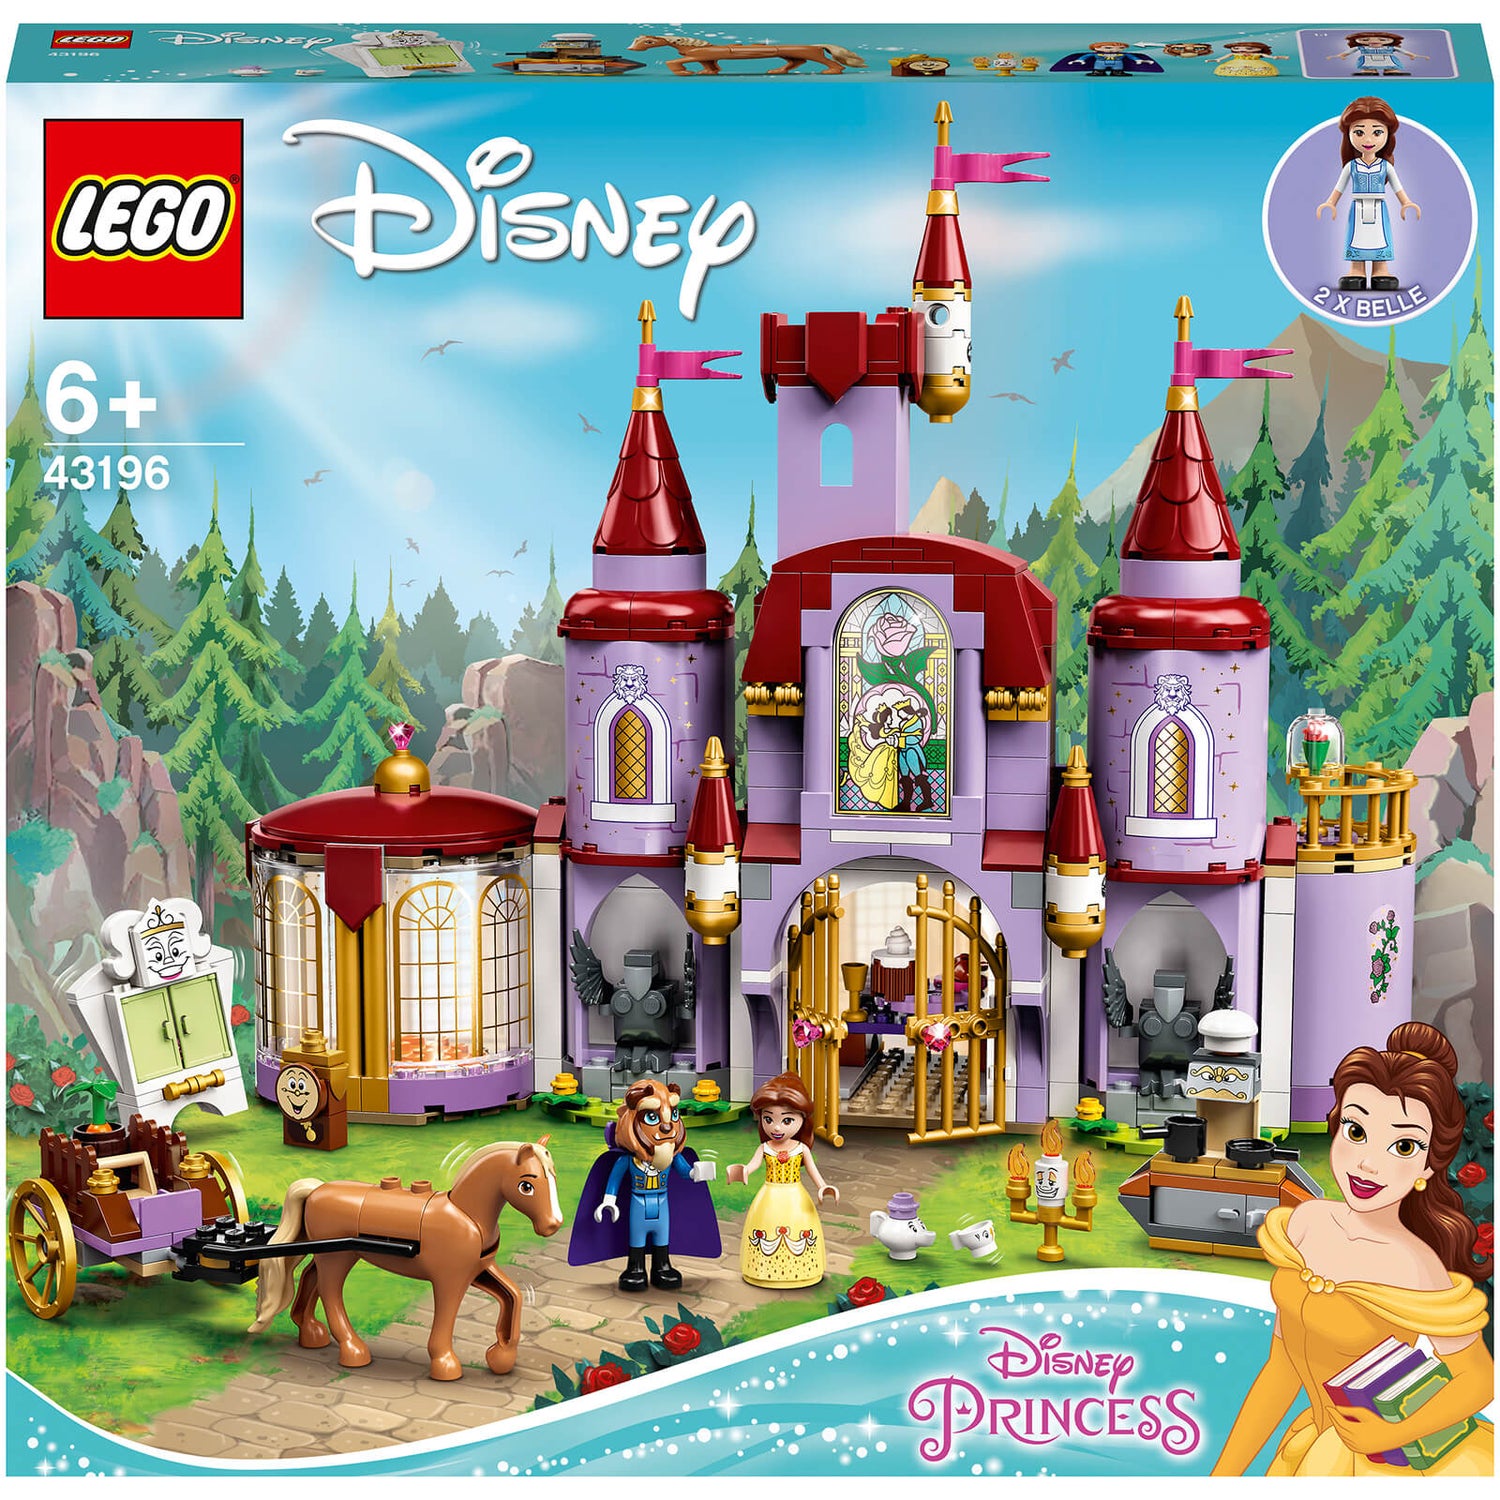 LEGO Disney Princess Belle and the Beast's Castle Toy (43196)